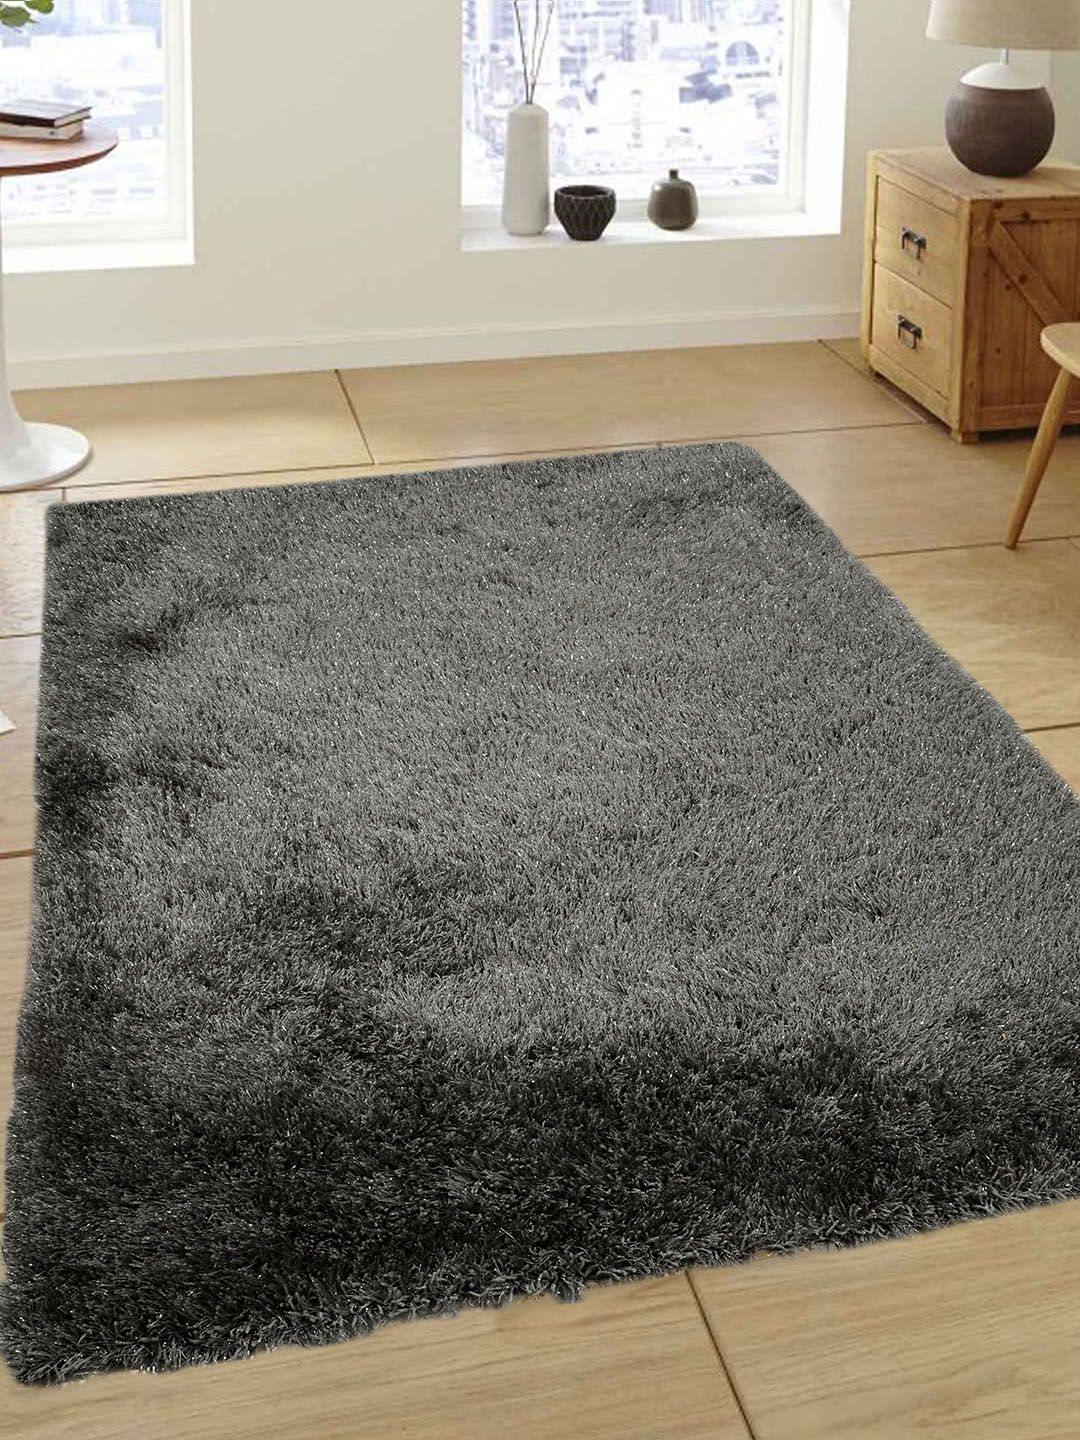 Saral Home Grey Solid Floor Carpet Price in India